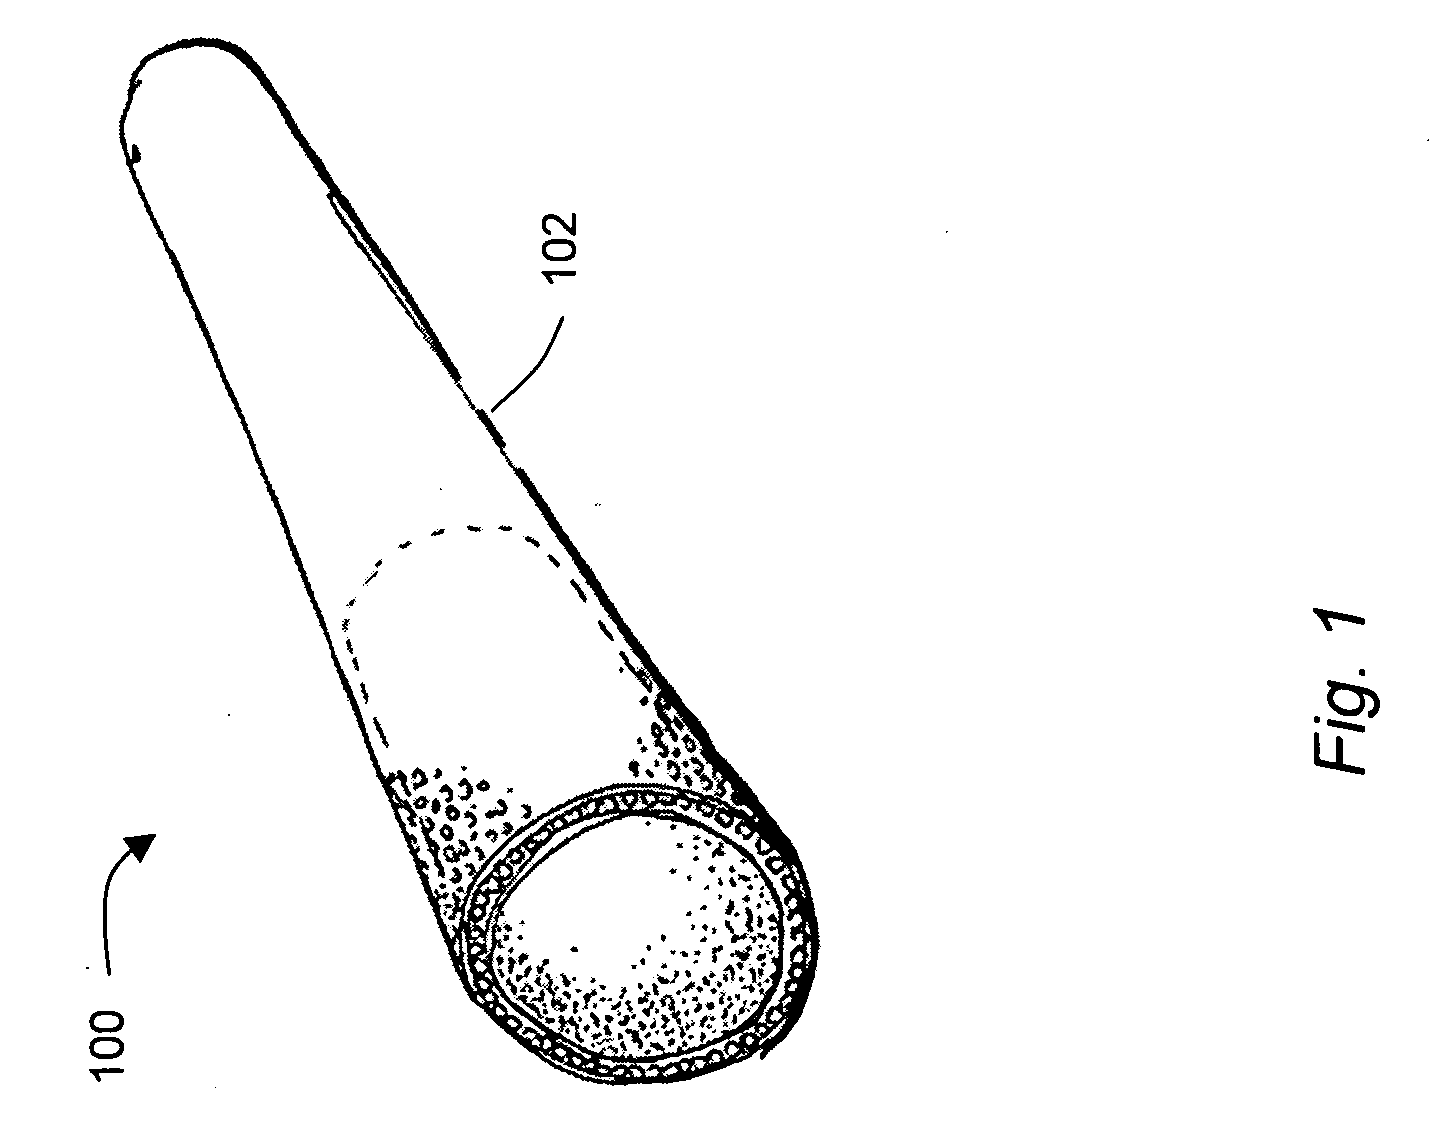 System and process for tobaccoless nicotine delivery